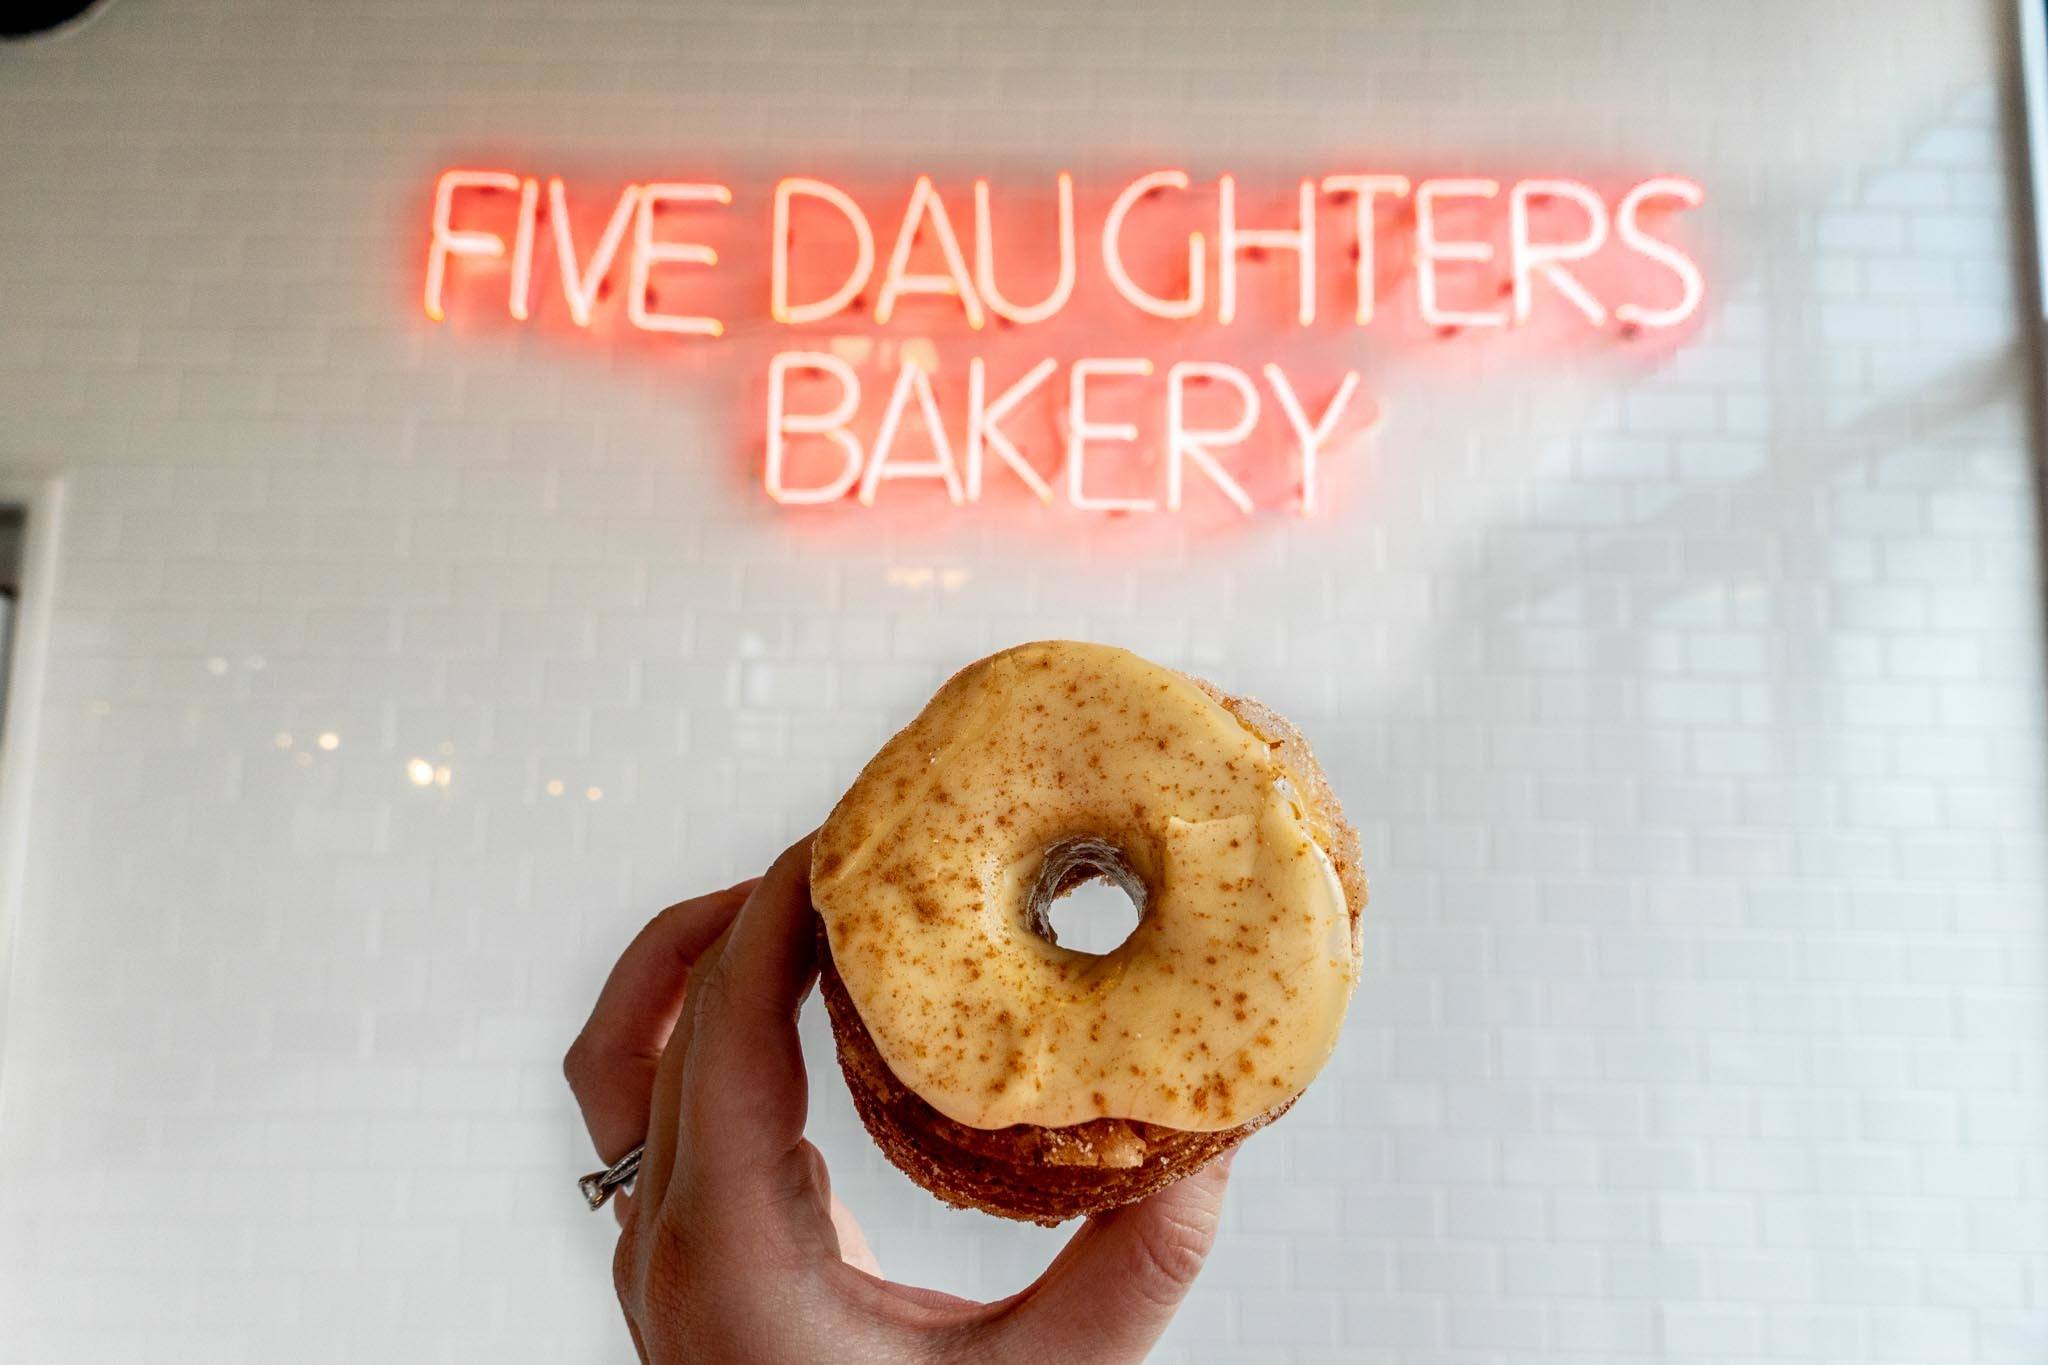 Maple glazed donut under the illuminated Five Daughters Bakery sign.